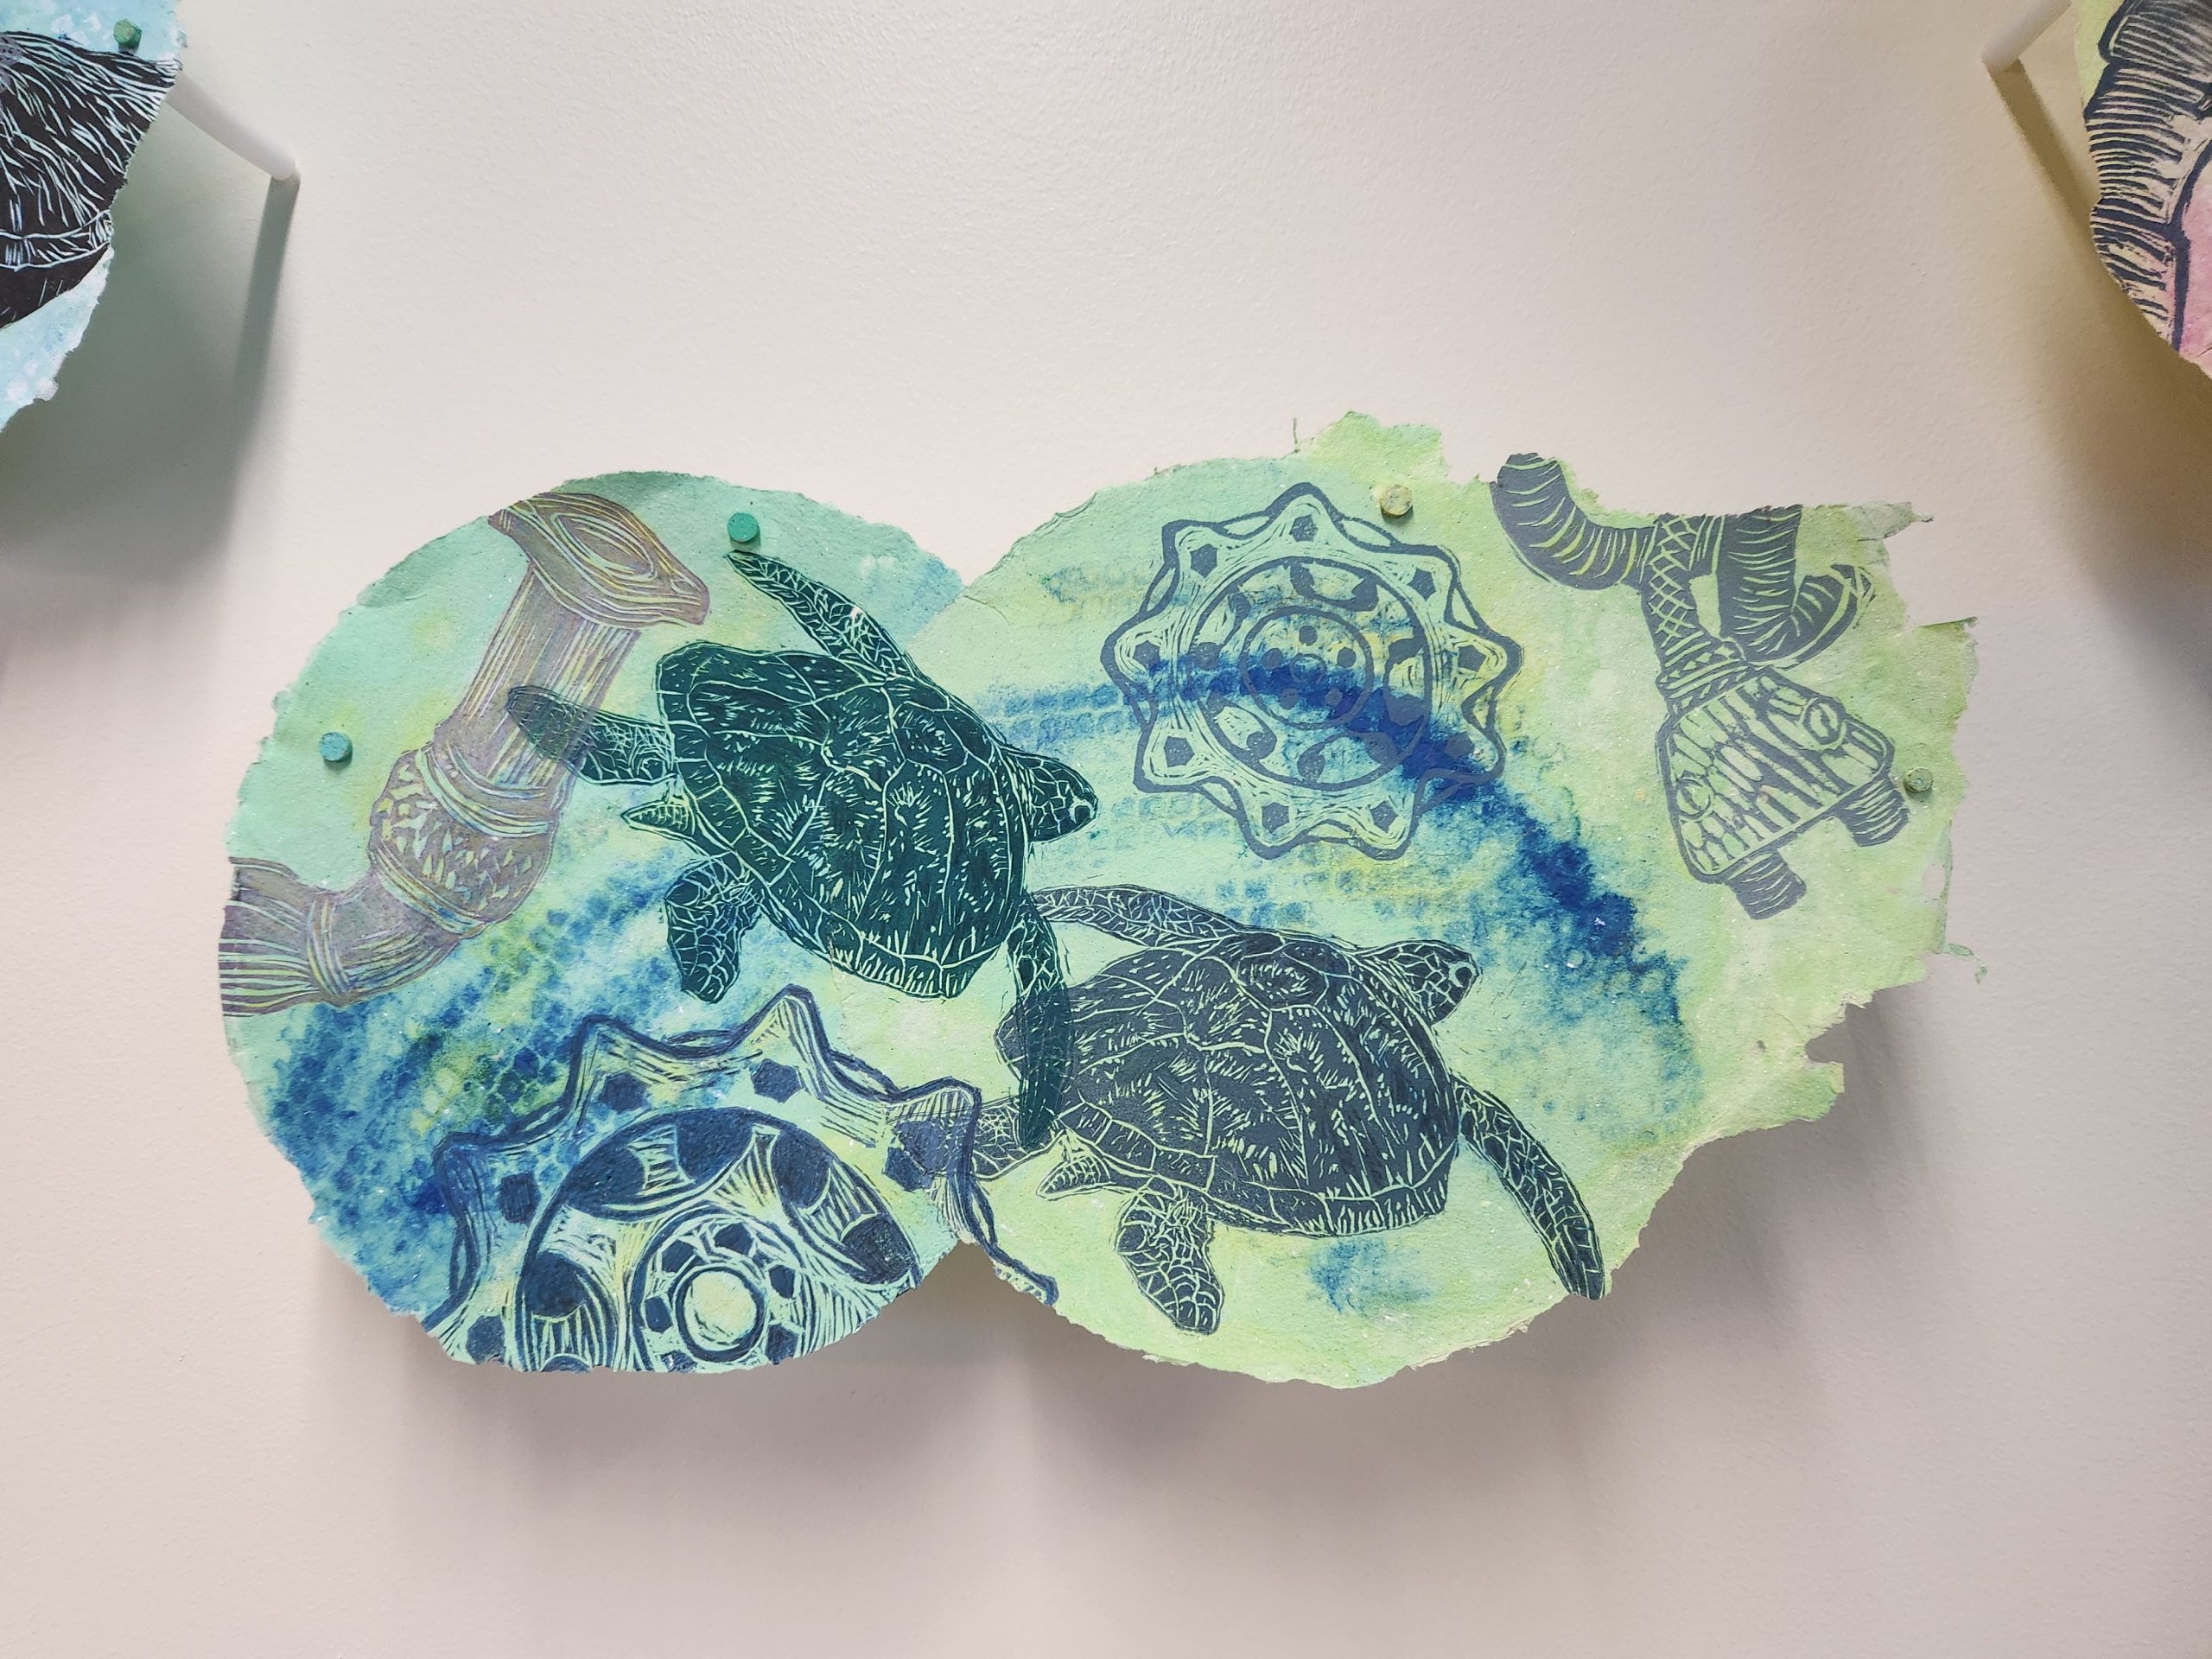 Marilyn Propp, "Travelers," 2014. Relief print on handmade cotton paper with pulp painting, 9 ¾ x 18 in. Part of "Pulped Under Pressure," 2022. Installation view, Glickman Family Library.